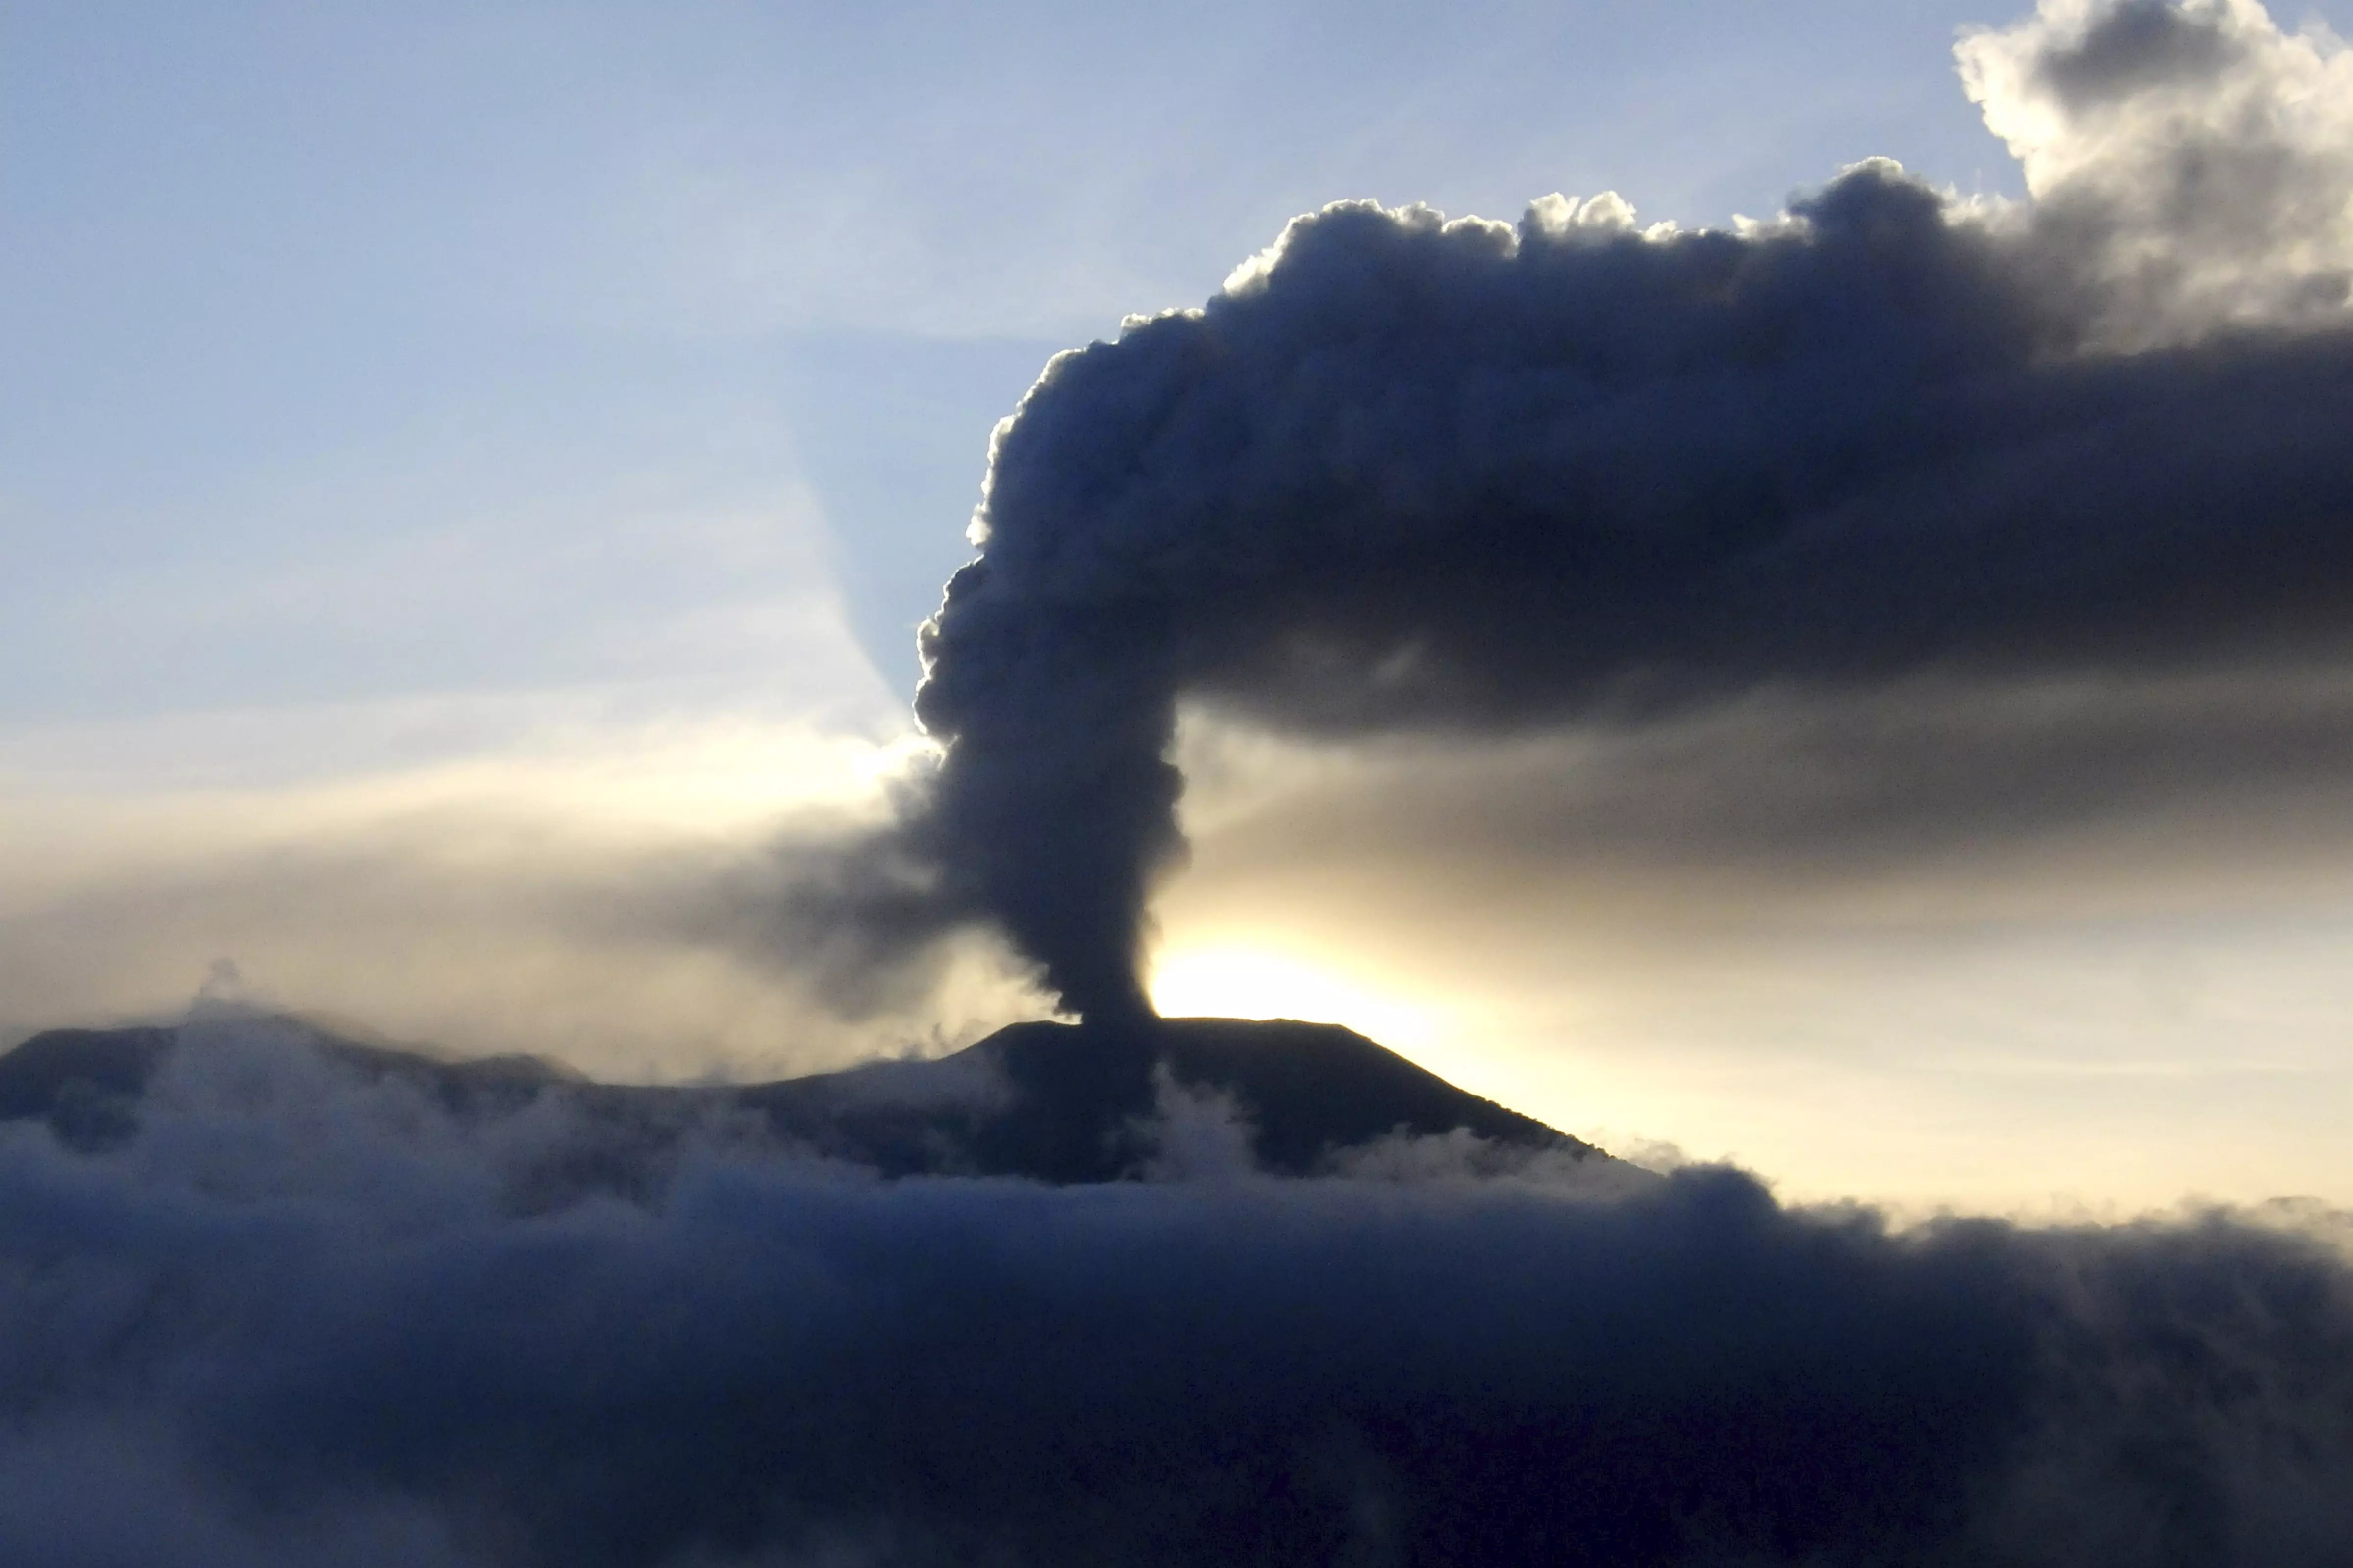 Indonesia: More bodies found after Marapi eruption; confirmed toll 23